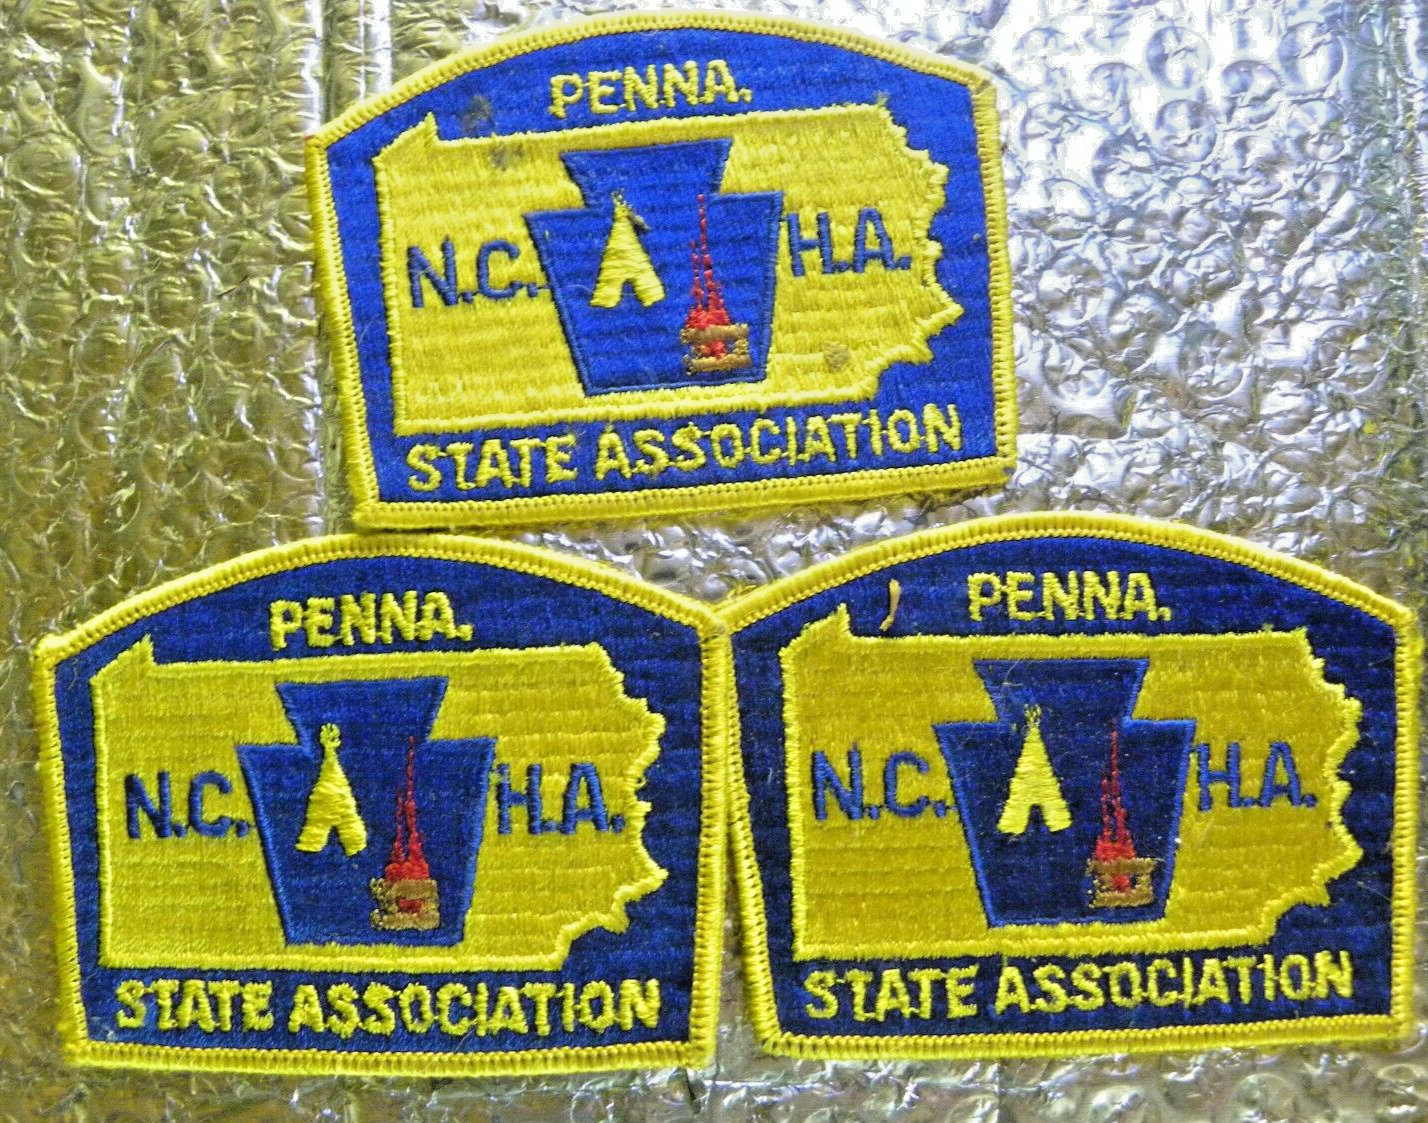 Lot of 3 Vintage Retired Patches Penna N.C H.A State Association 